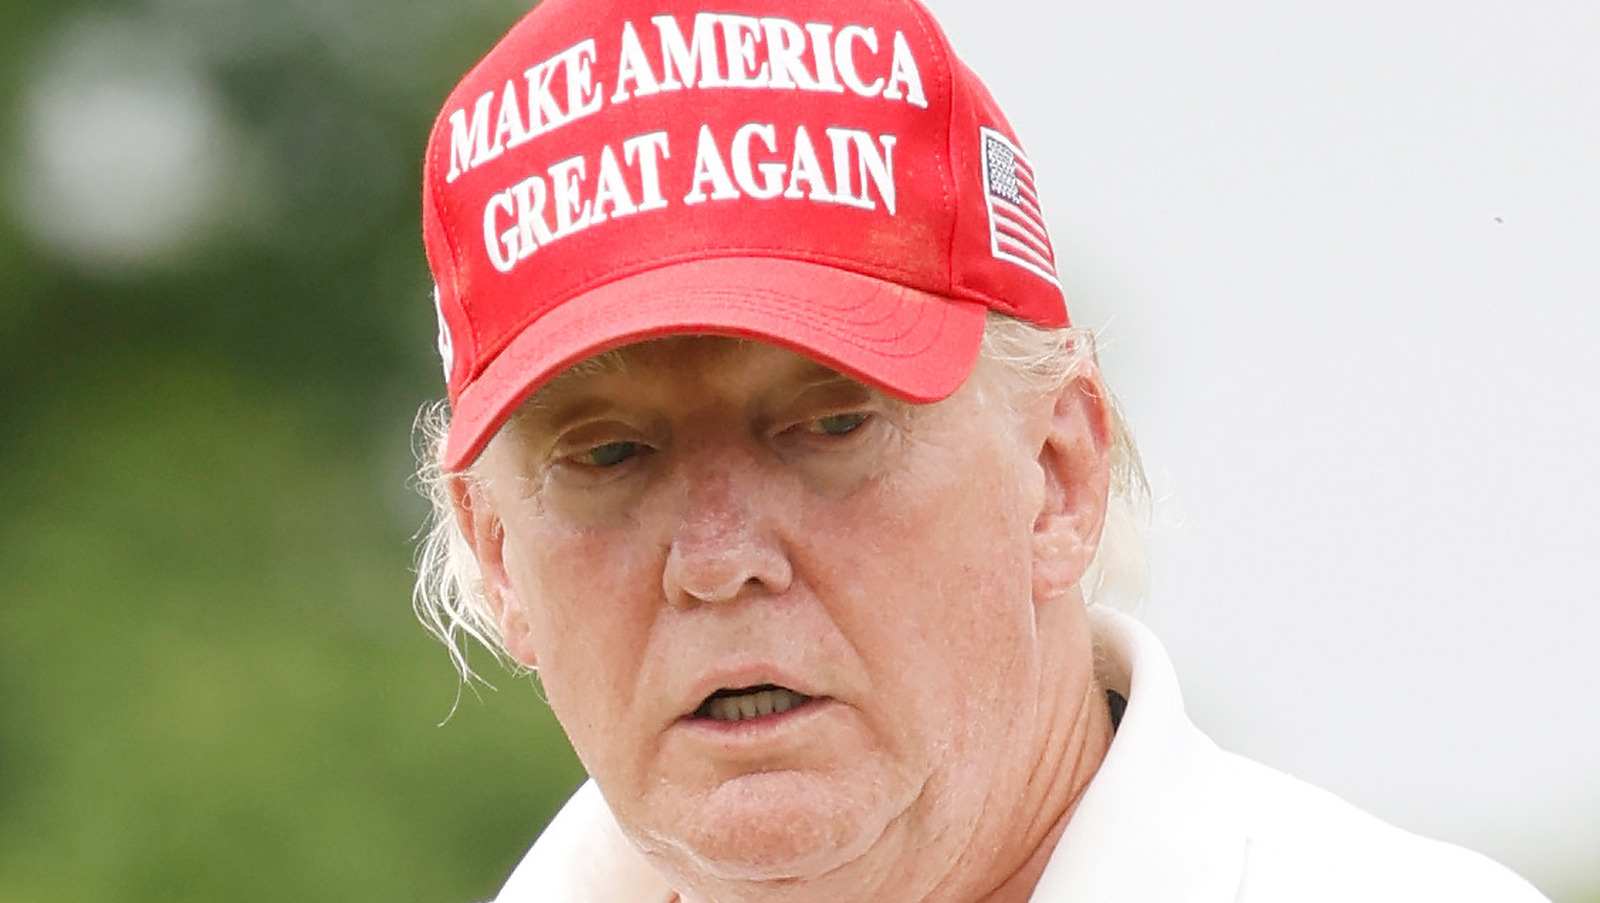 Why Donald Trump's Golf Gear Could Land Him In Seriously Hot Water